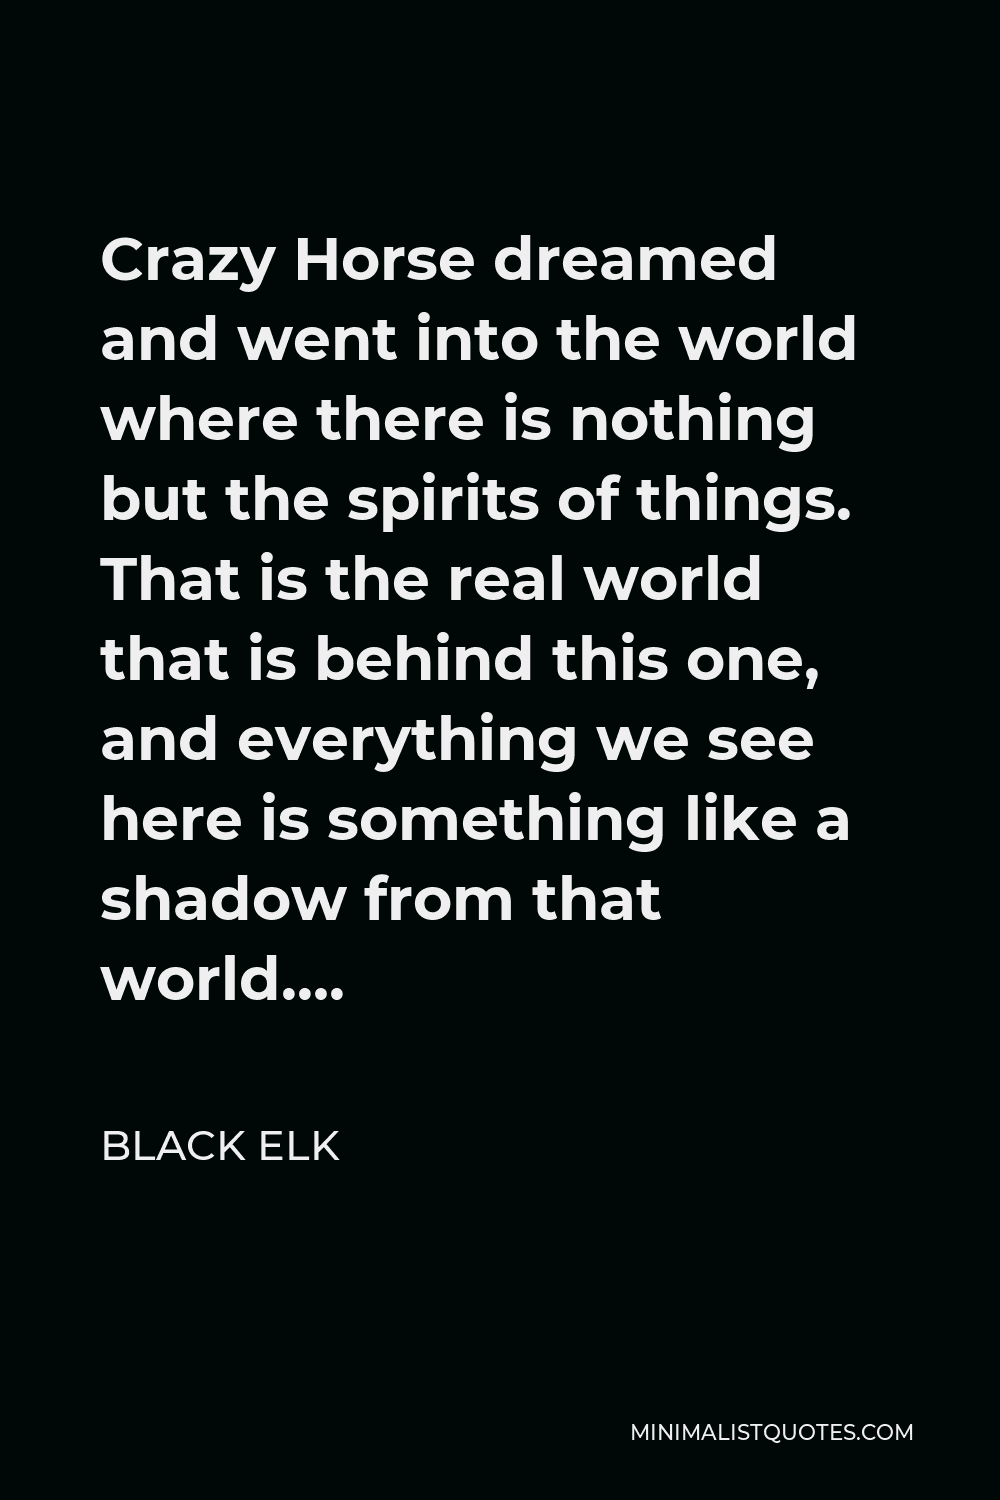 Black Elk Quote - Crazy Horse dreamed and went into the world where there is nothing but the spirits of things. That is the real world that is behind this one, and everything we see here is something like a shadow from that world….